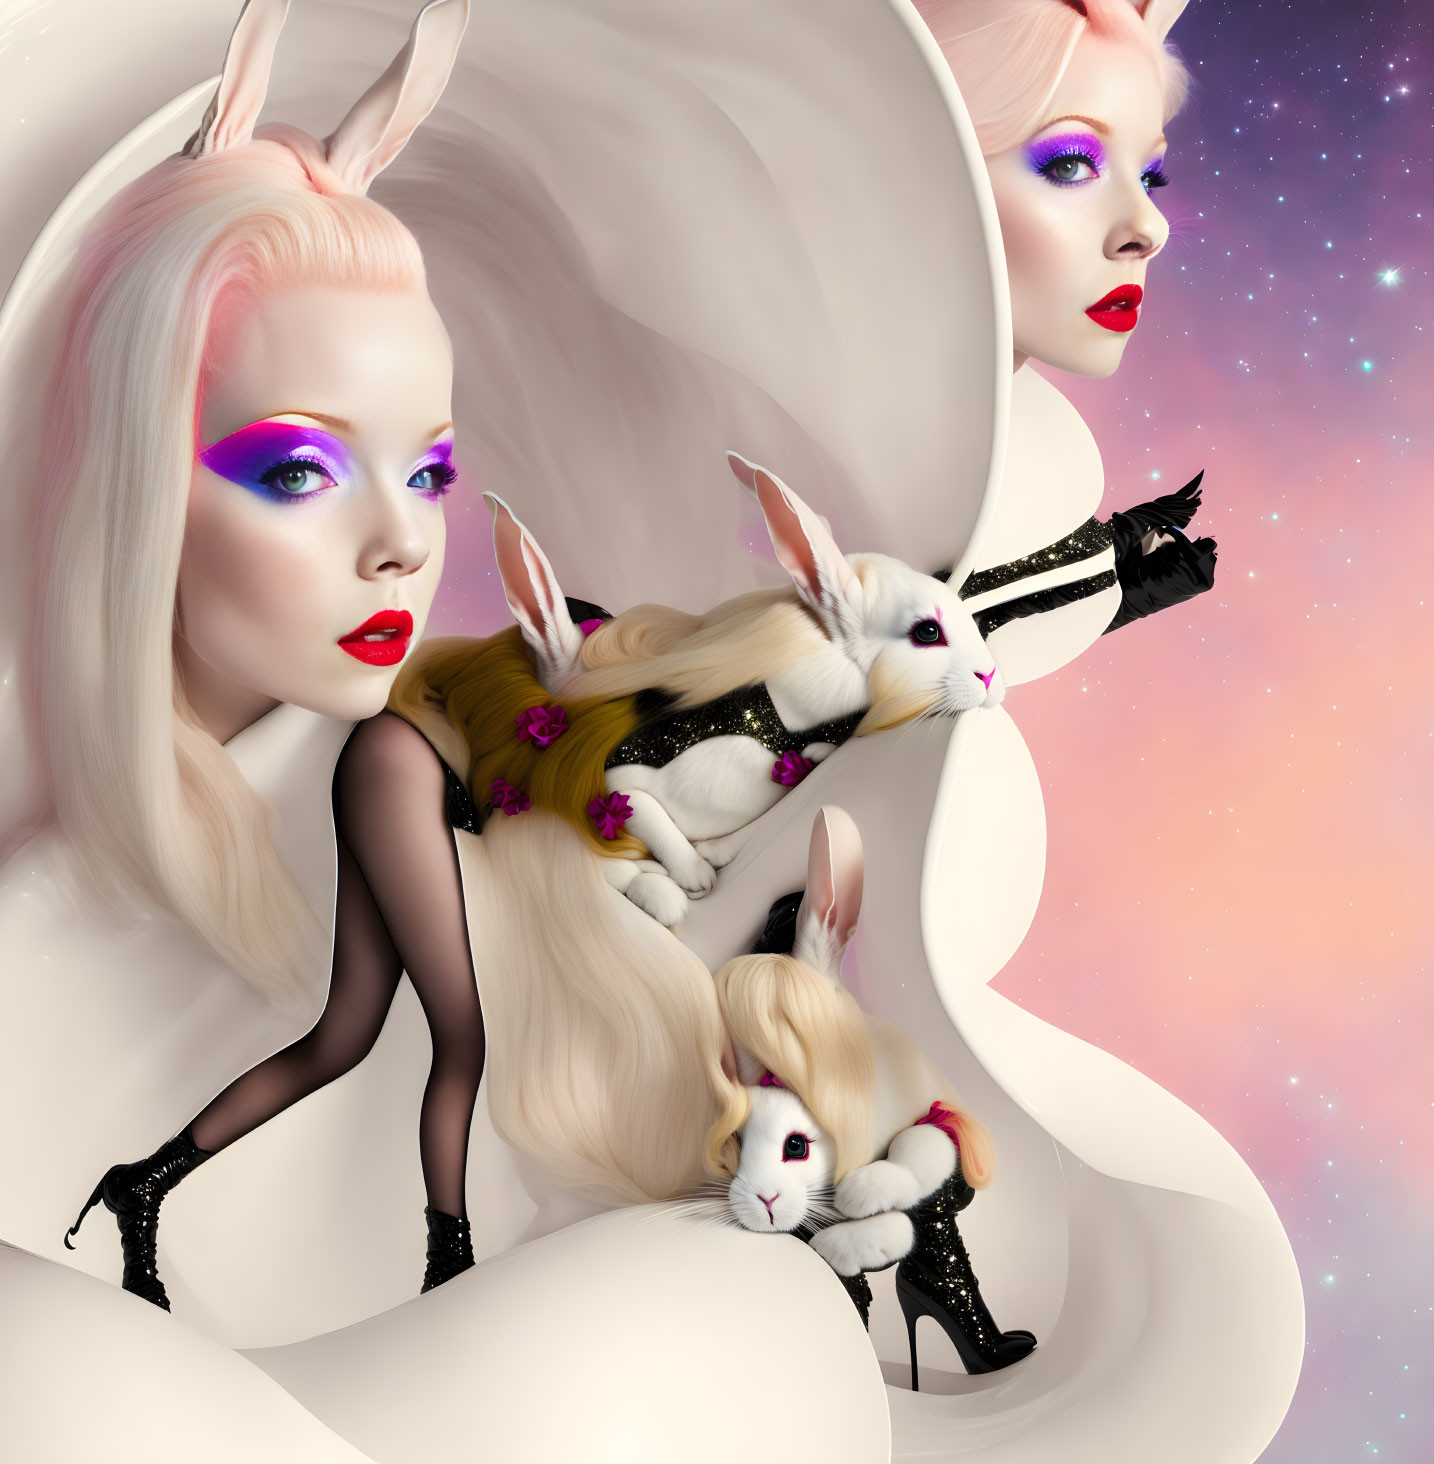 Surreal cosmic background with mirrored women holding bunnies